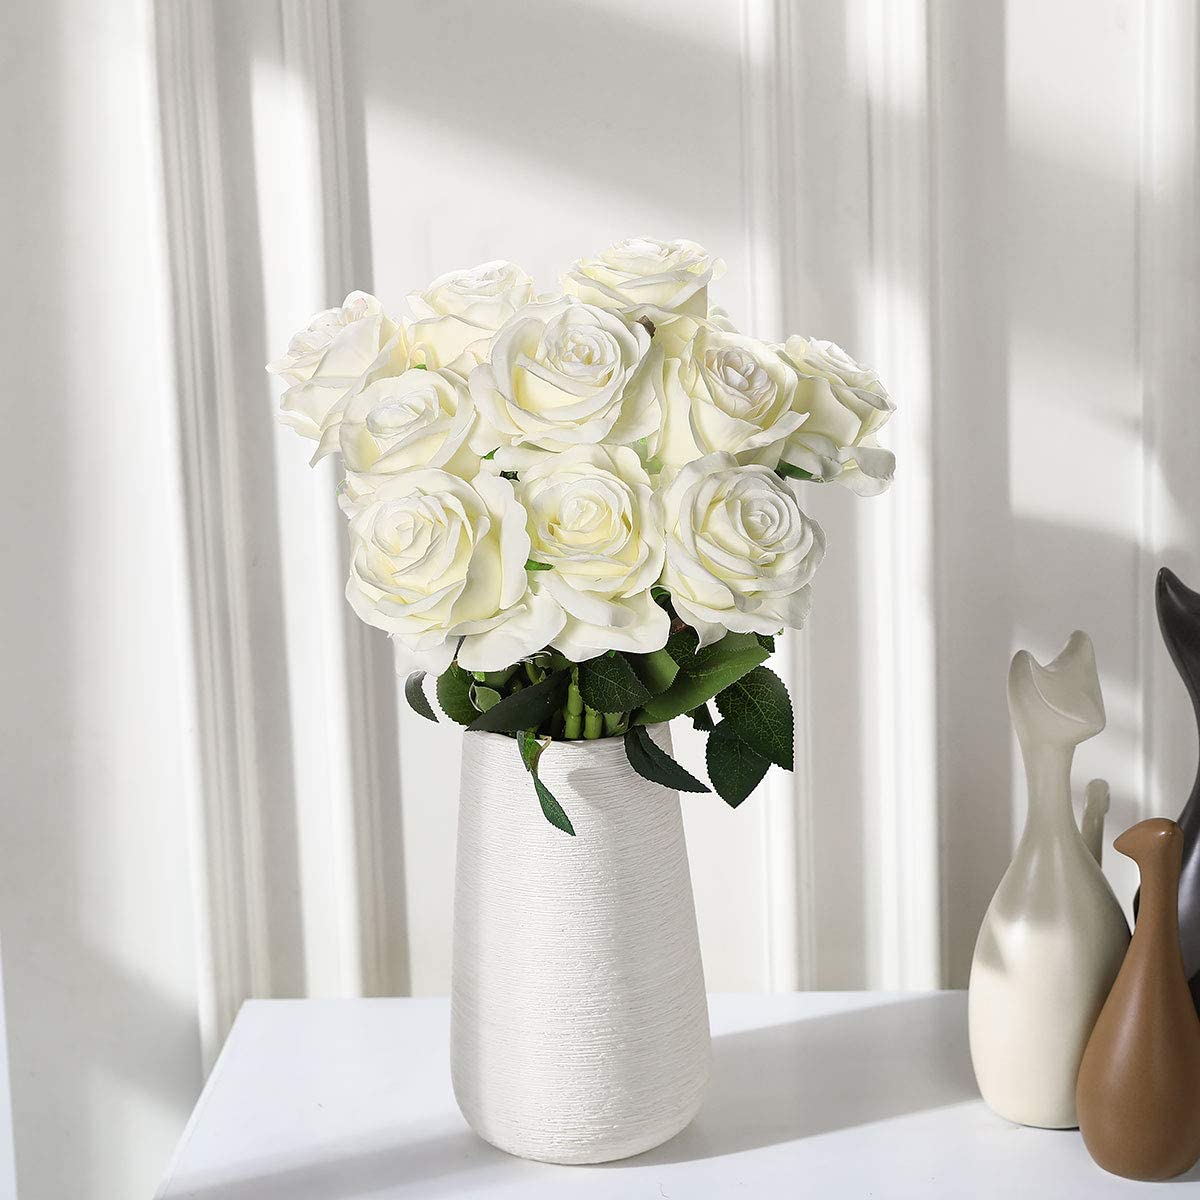 Blossom Roses,Champagne Tifuly 12 PCS Artificial Roses 19.68'' Single Long Stem Fake Rose Silk Bridal Wedding Bouquet Realistic Flower for Home Garden Party Hotel Office Decor